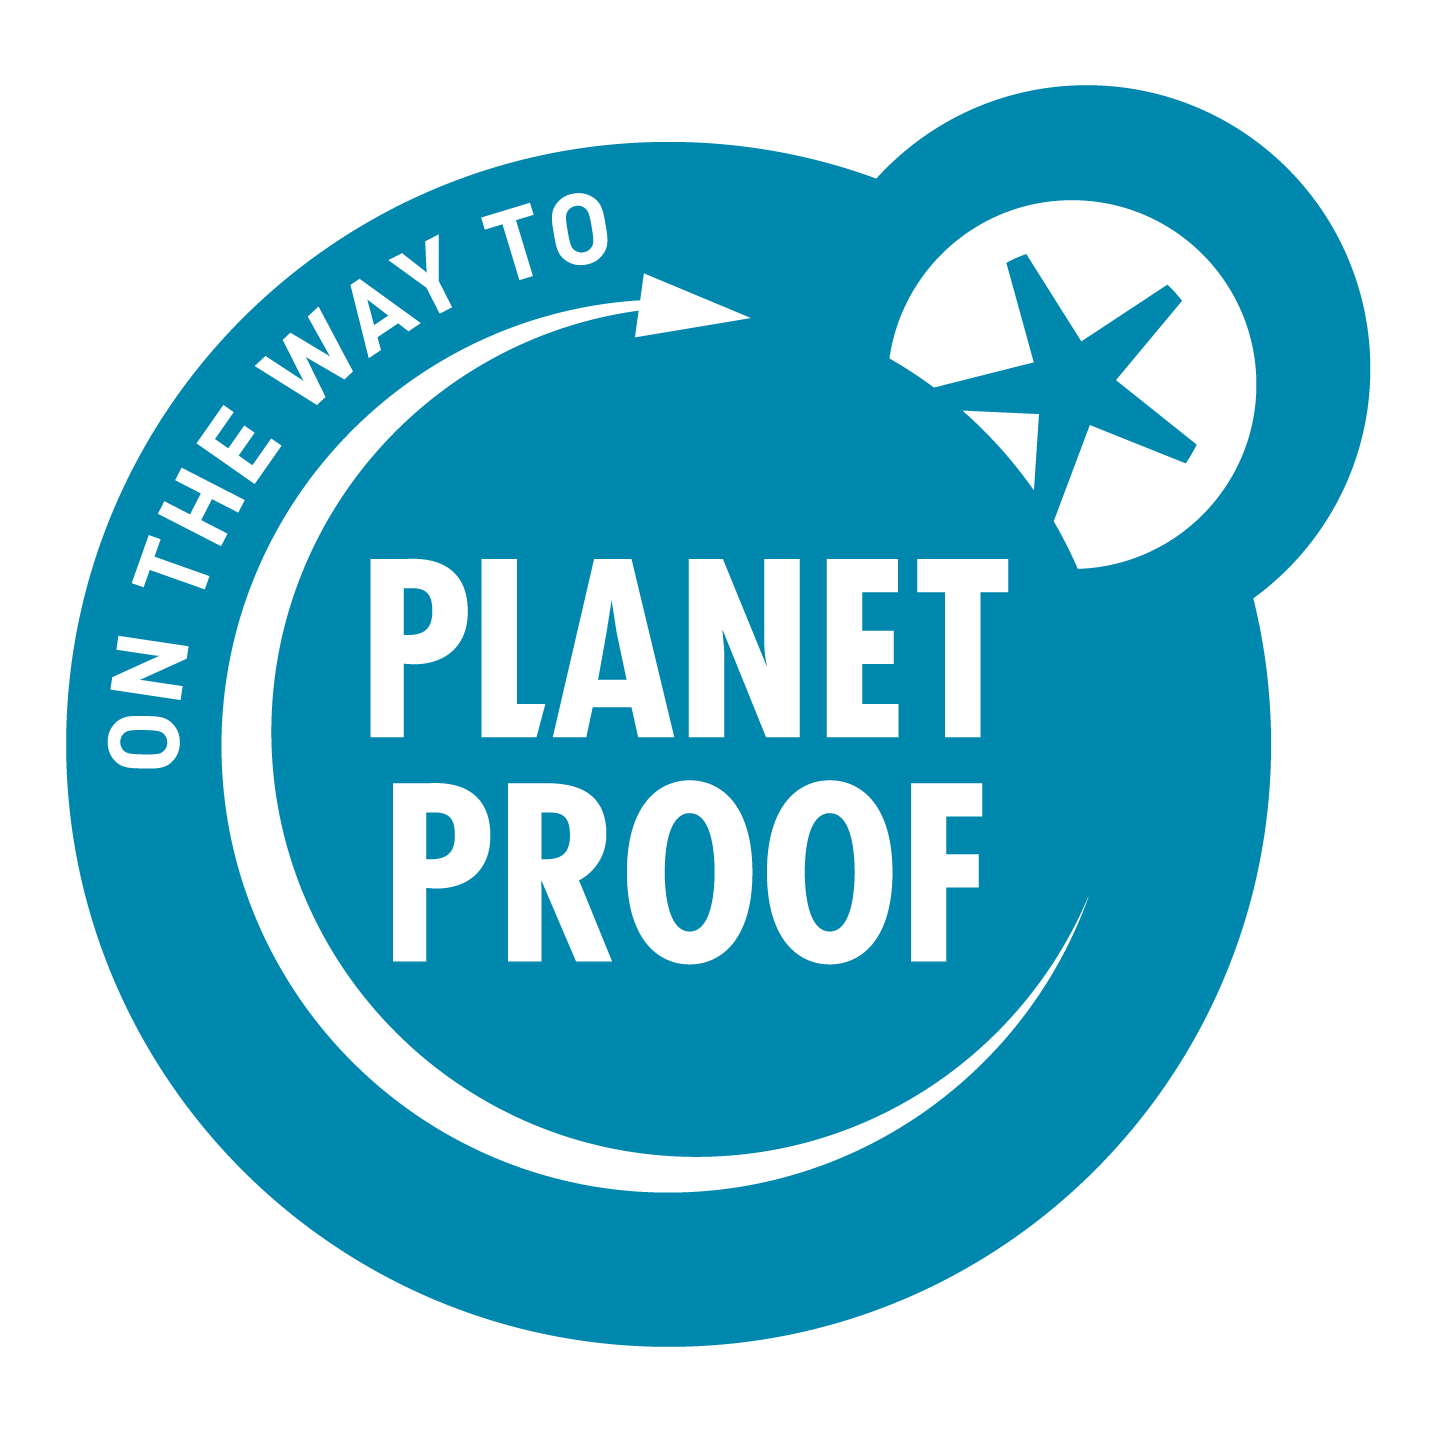 Proof Logo - On the way to PlanetProof logo tool and guidelines - PlanetProof (b ...